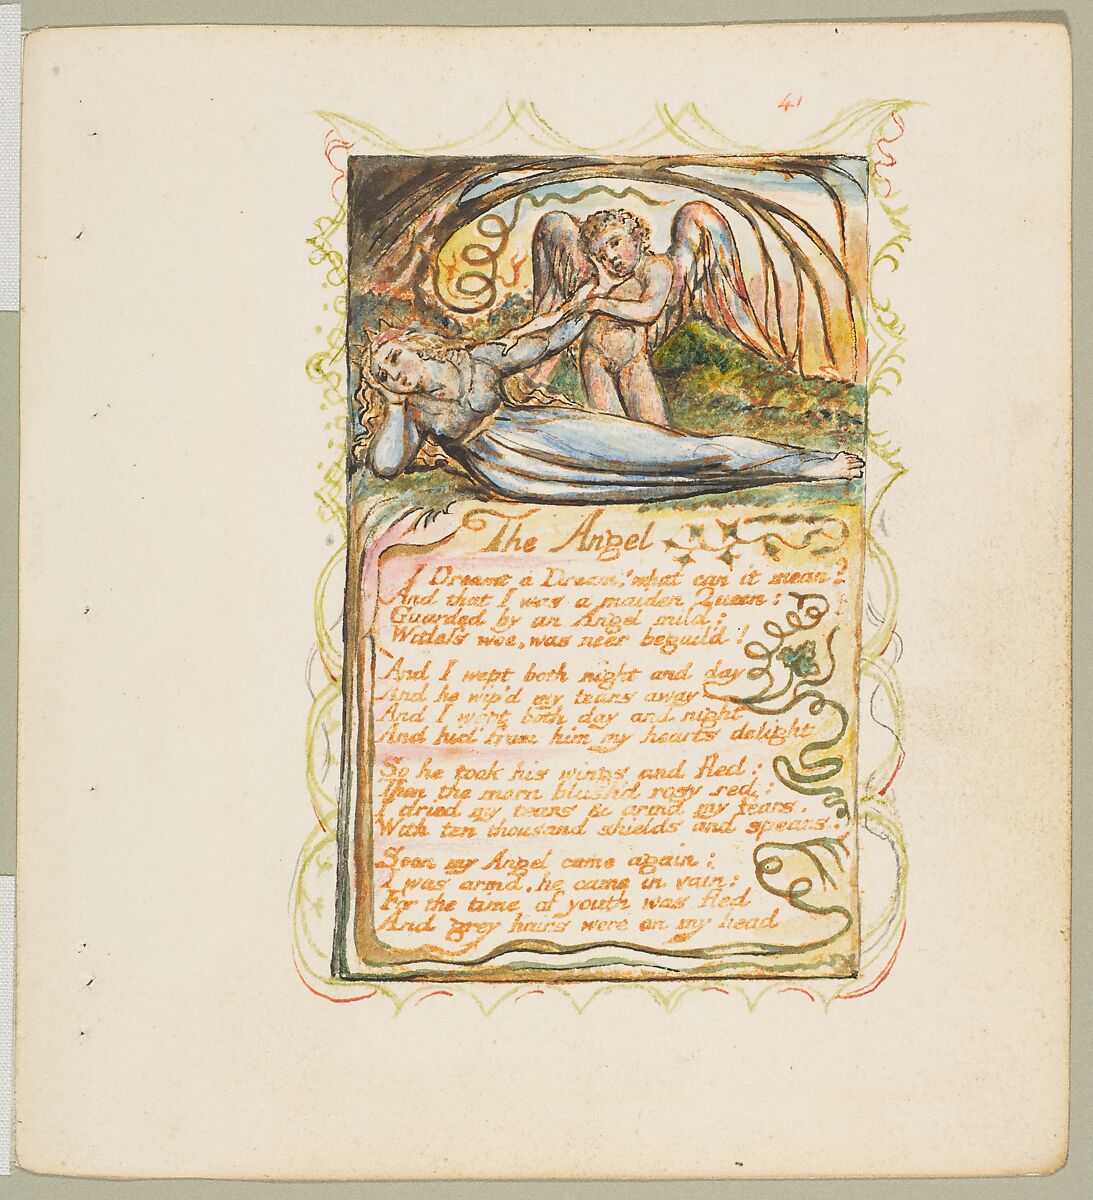 Songs of Experience: The Angel, William Blake  British, Relief etching printed in orange-brown ink and hand-colored with watercolor and shell gold